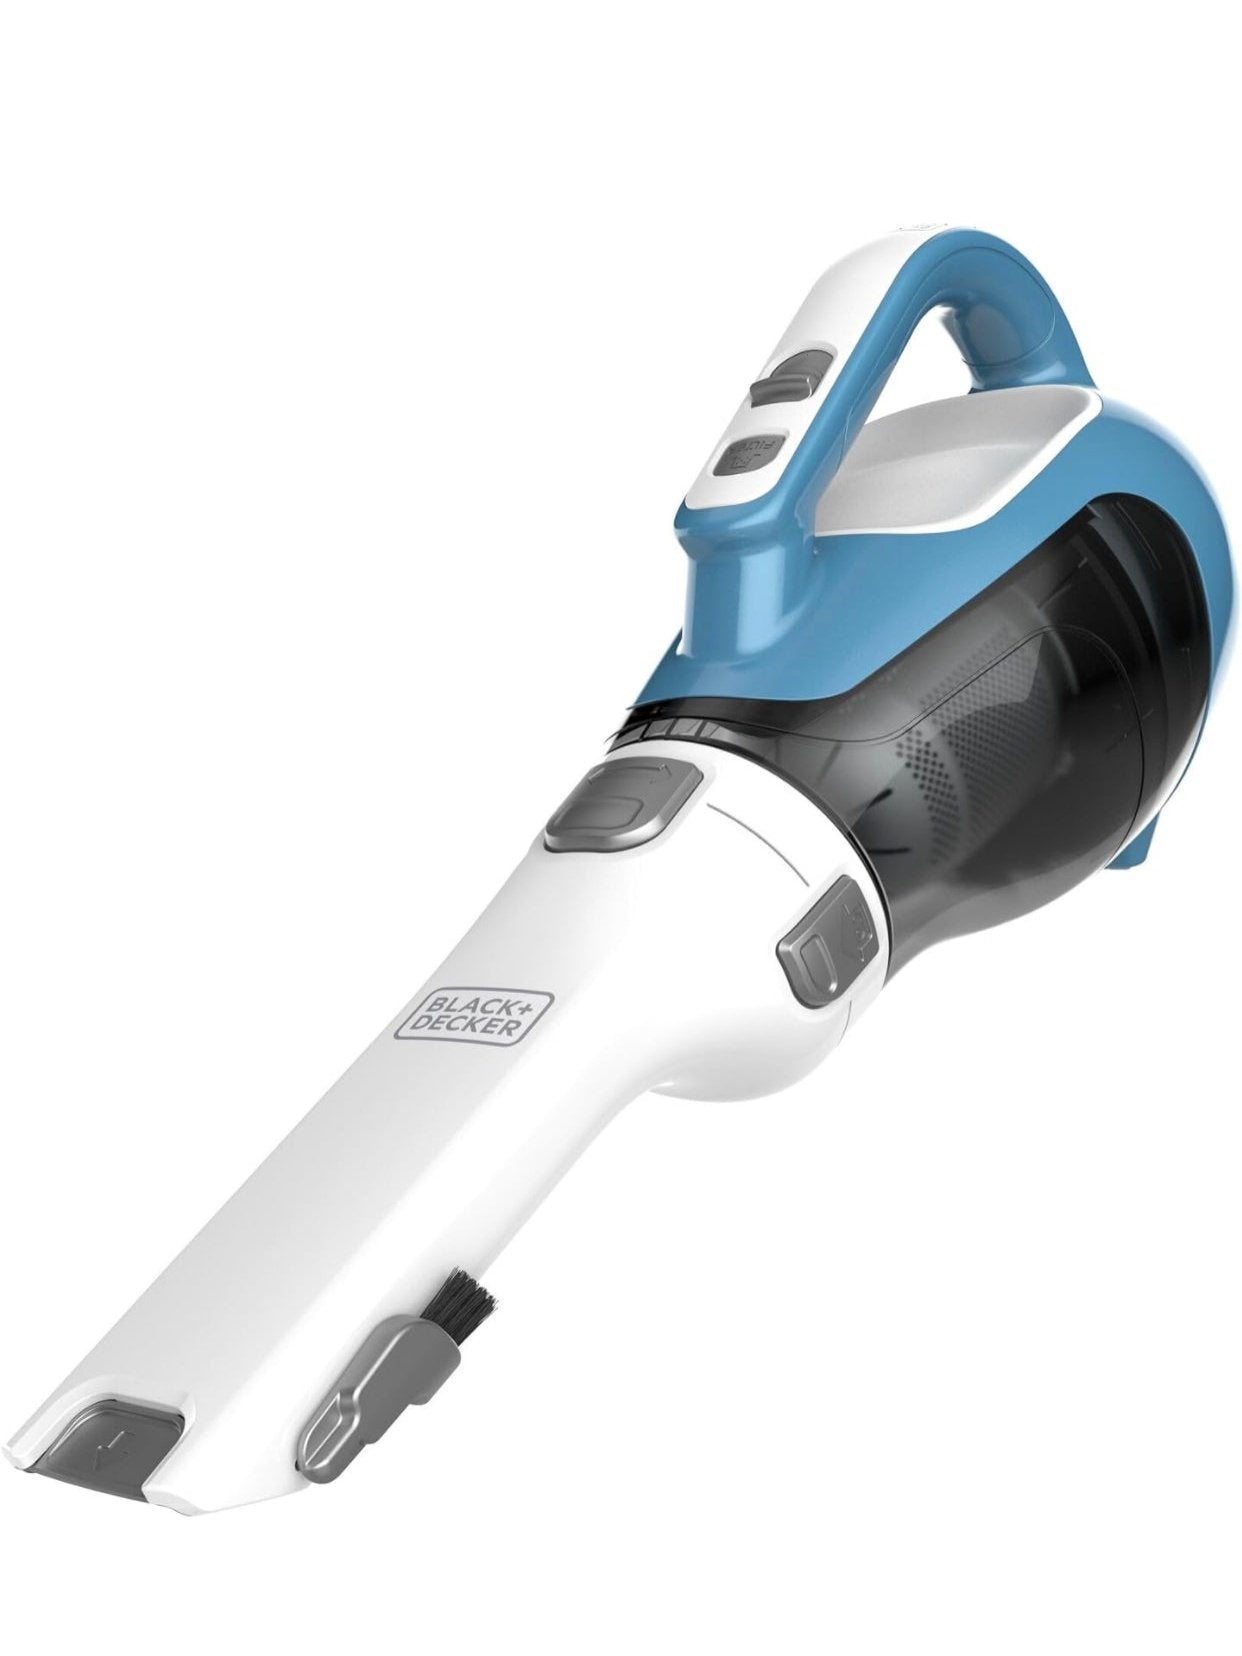 BLACK+DECKER dustbuster AdvancedClean Cordless Handheld Vacuum, Compact Home and Car Vacuum with Crevice Tool (CHV1410L), Blue, White